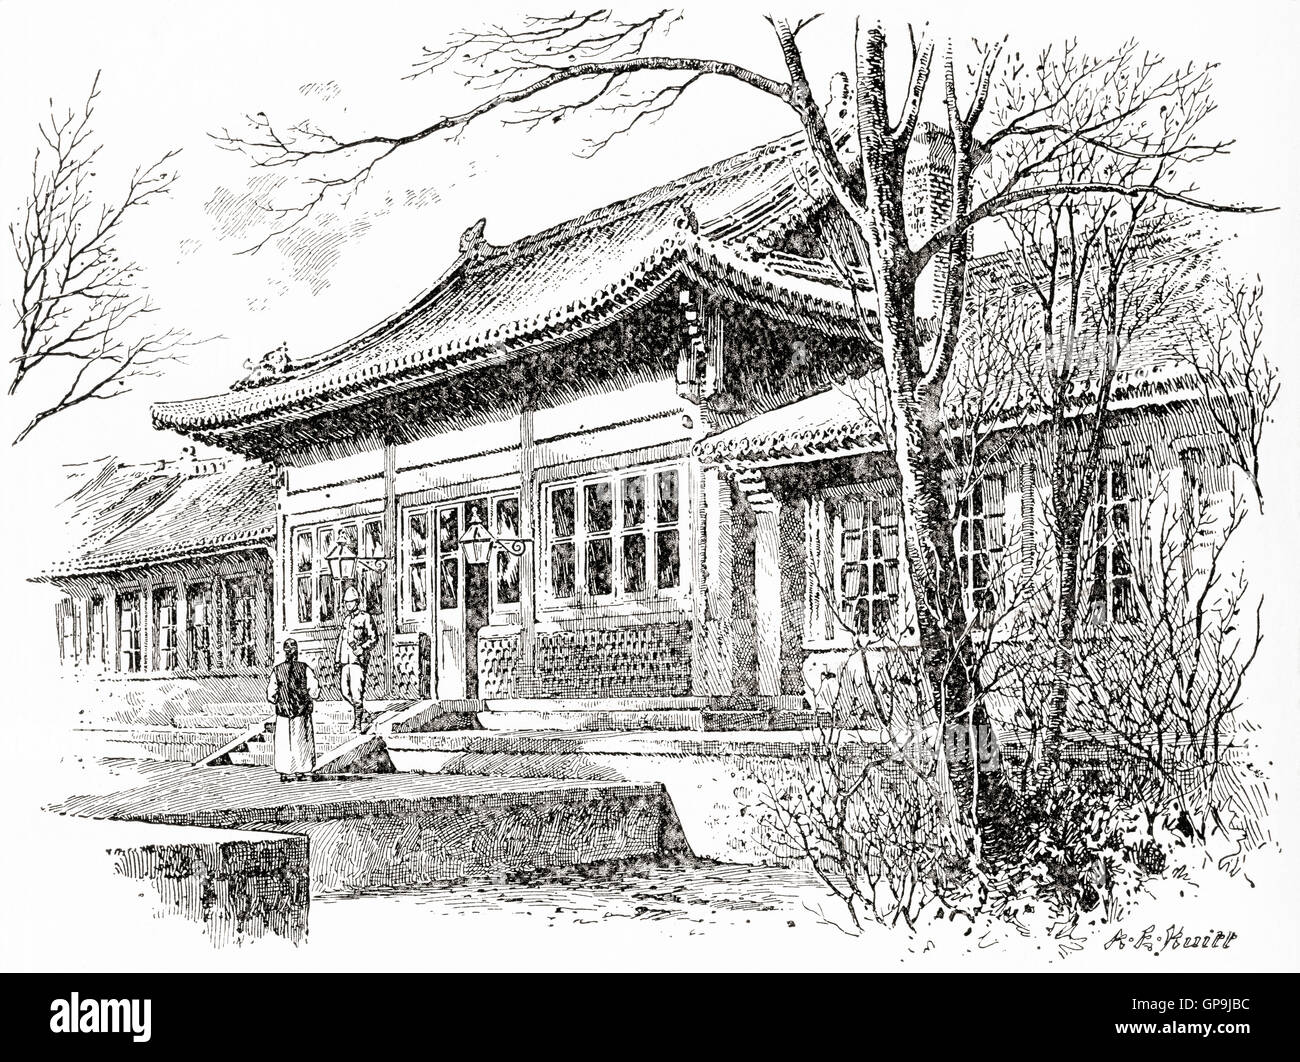 The British Legation, Peking (now Beijing) China in the 19th century. Stock Photo